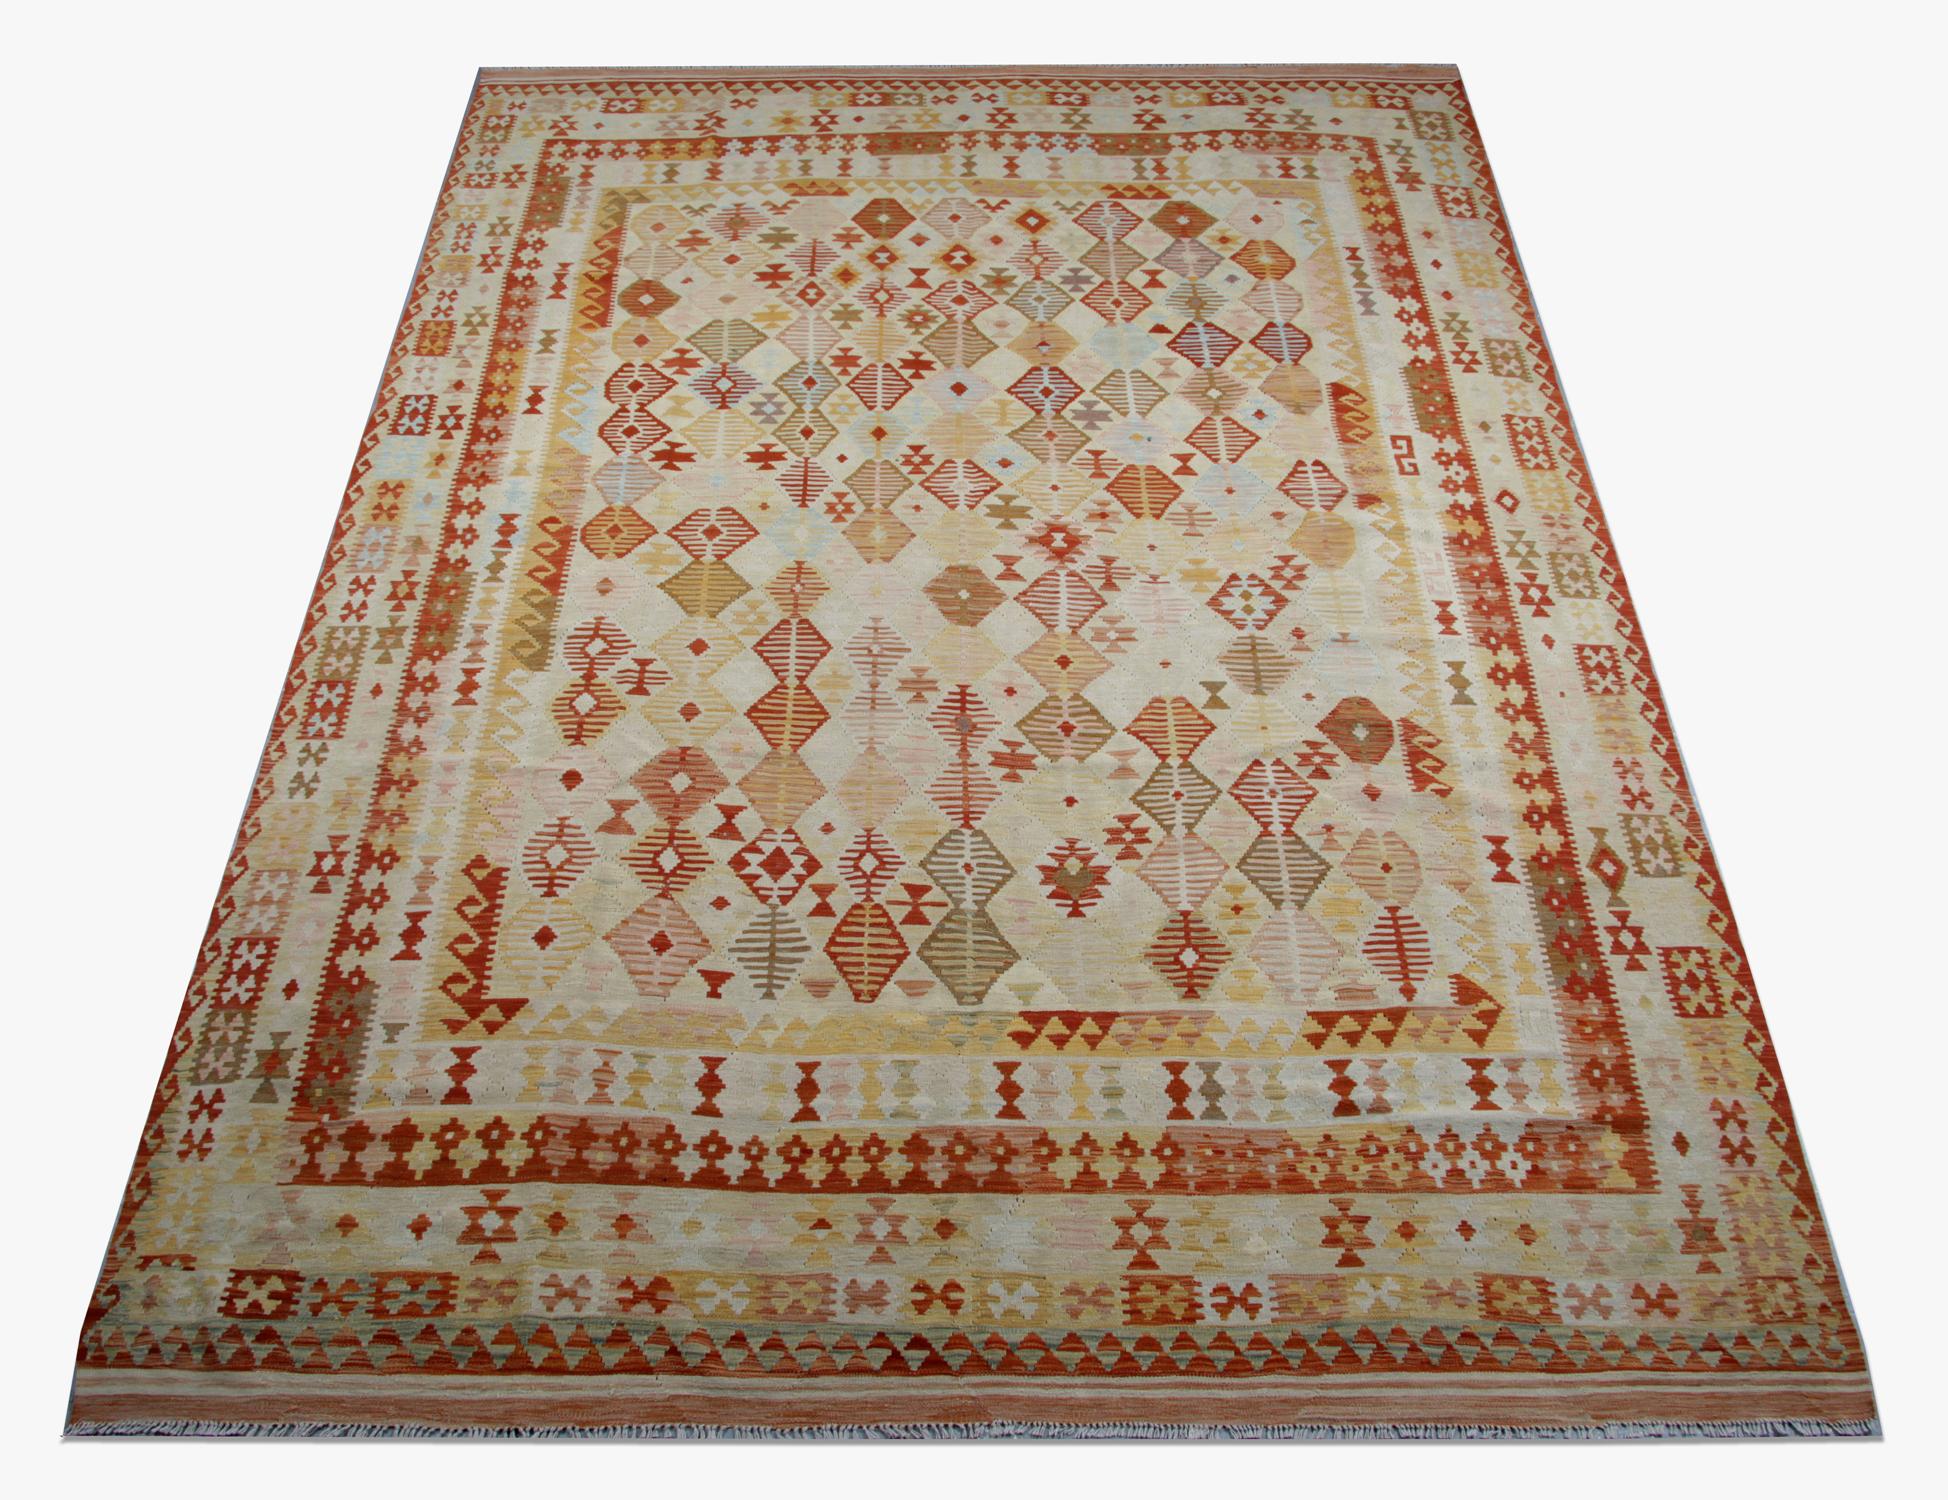 This geometric Kilim rug was handmade in Afghanistan by Uzbek and Turkman tribes. The rug is of the highest quality thanks to the fine hand-spun wool and cotton. Dyed using, only organic vegetable dyes. The designs belong to the Qashqai tribes. The